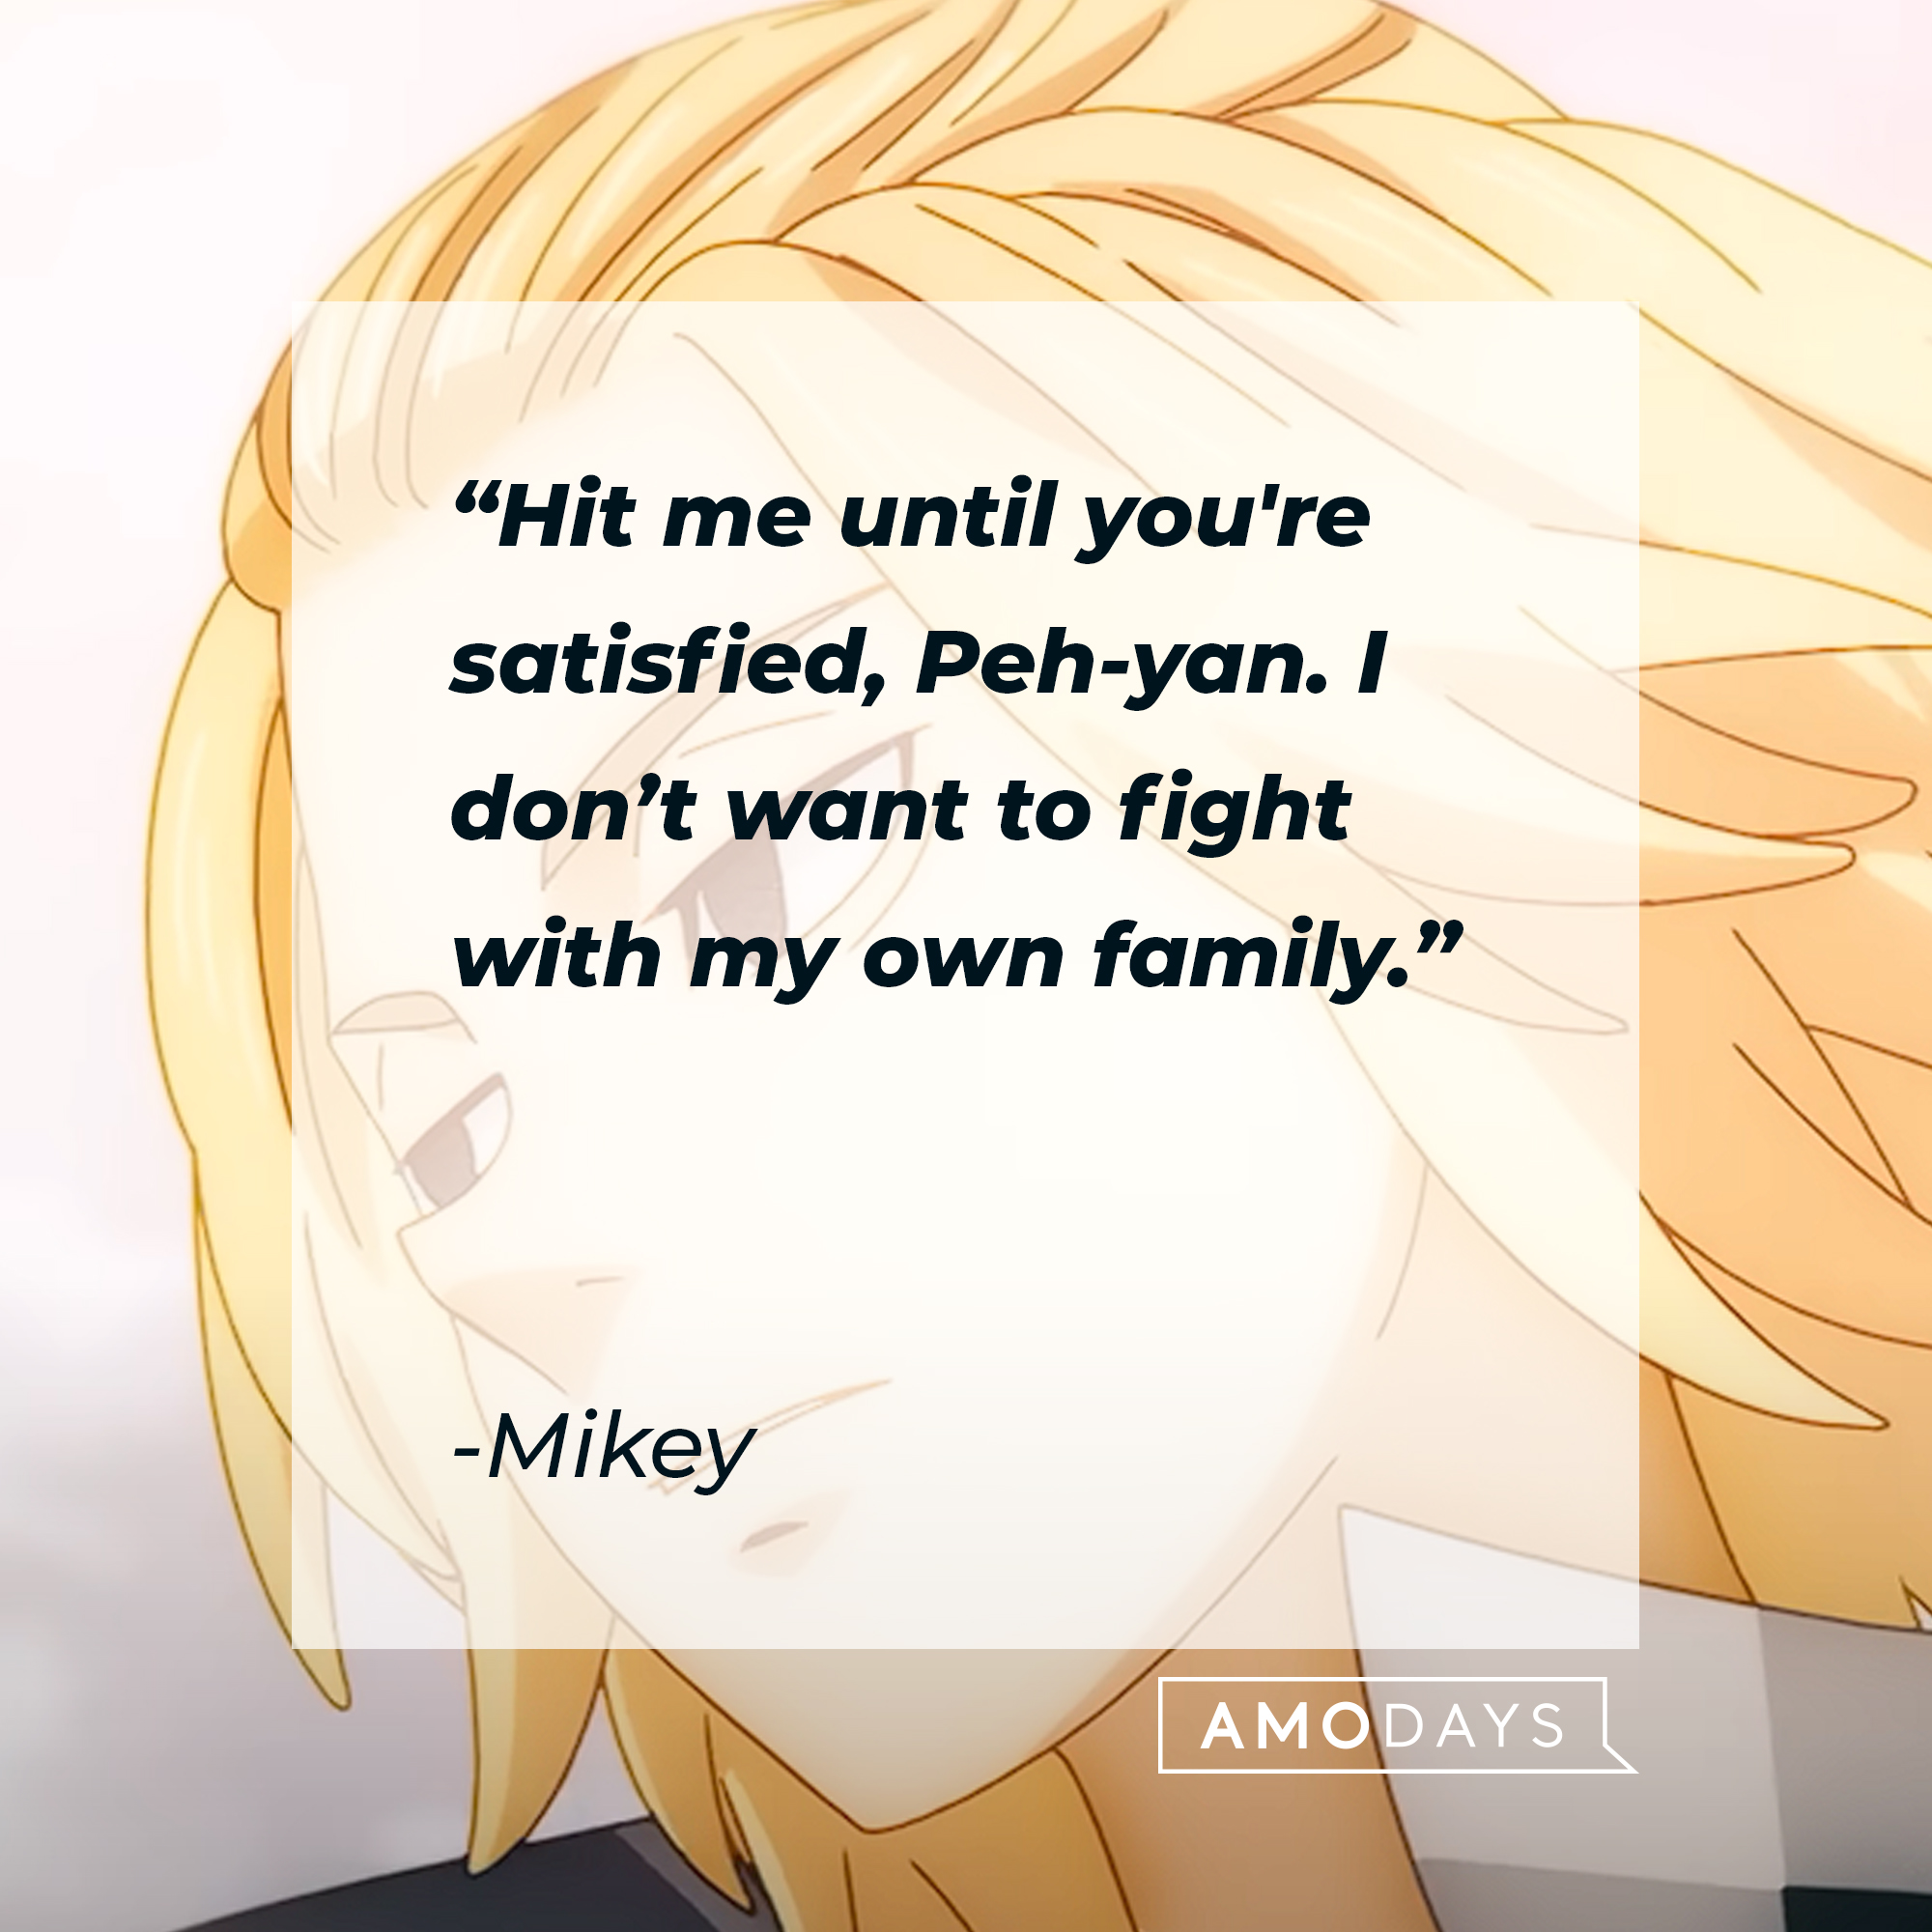 An image of Mikey with his quote: “Hit me until you're satisfied, Peh-yan. I don’t want to fight with my own family.” | Source: youtube.com/CrunchyrollCollection